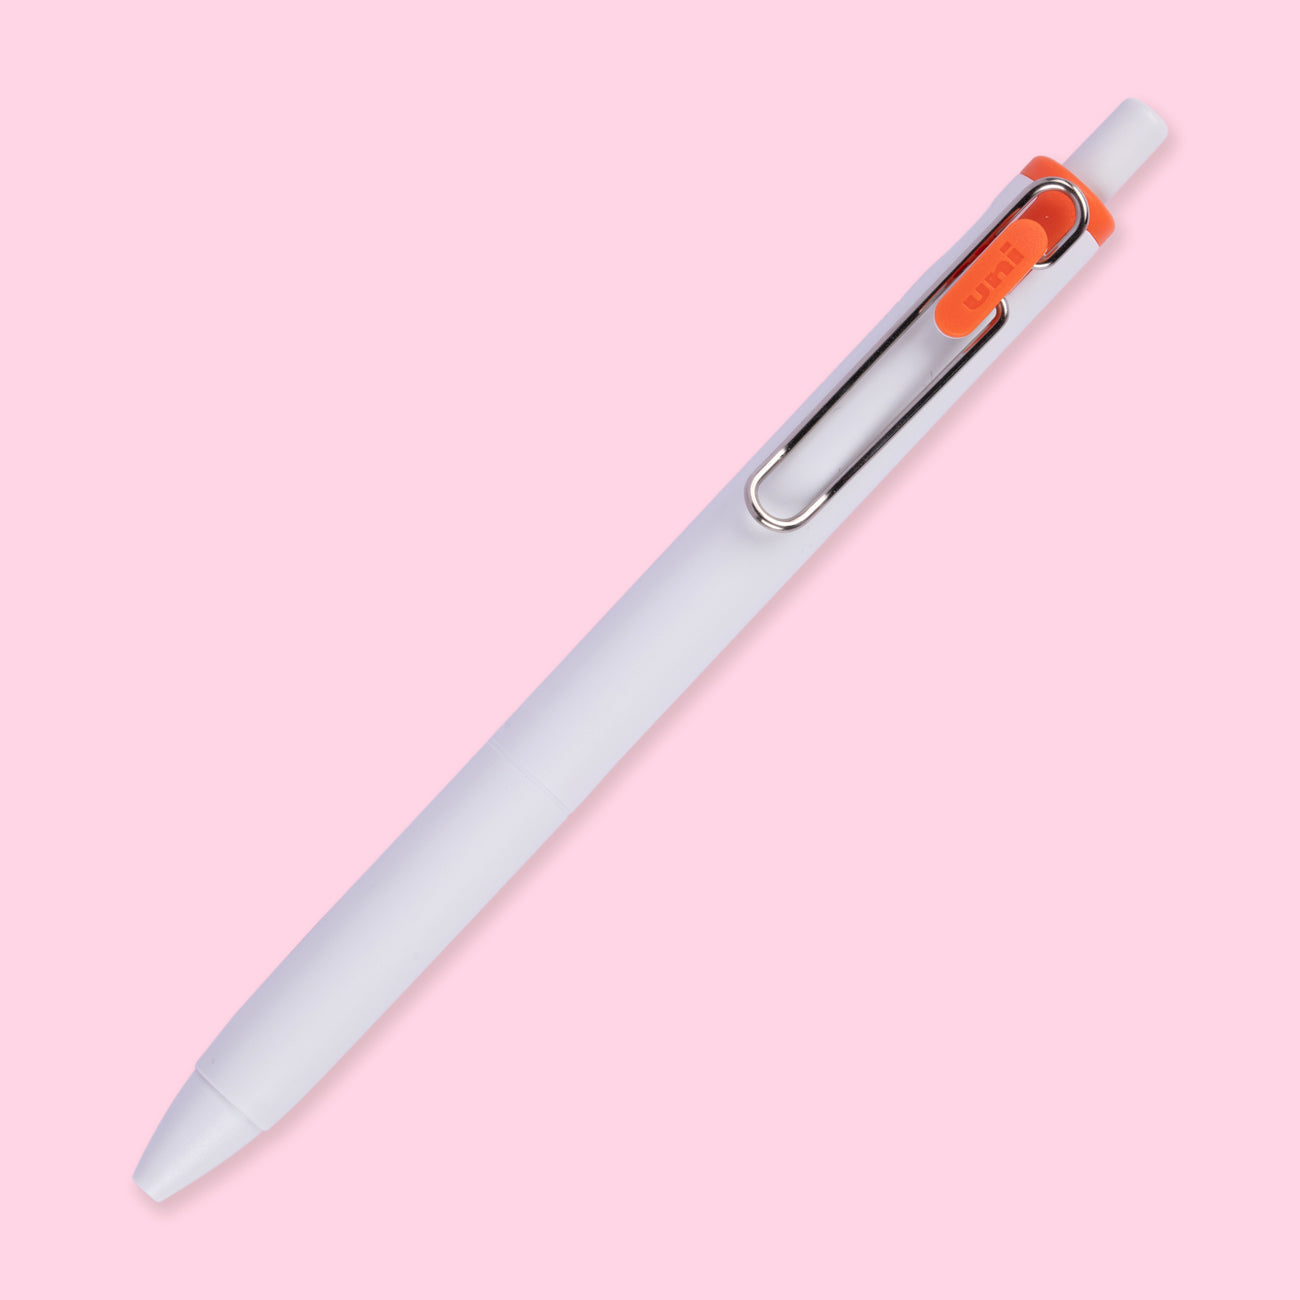 Uni-Ball One Gel Ink Ballpoint Pen Limited Edition - Fruit Tea Color - —  Stationery Pal